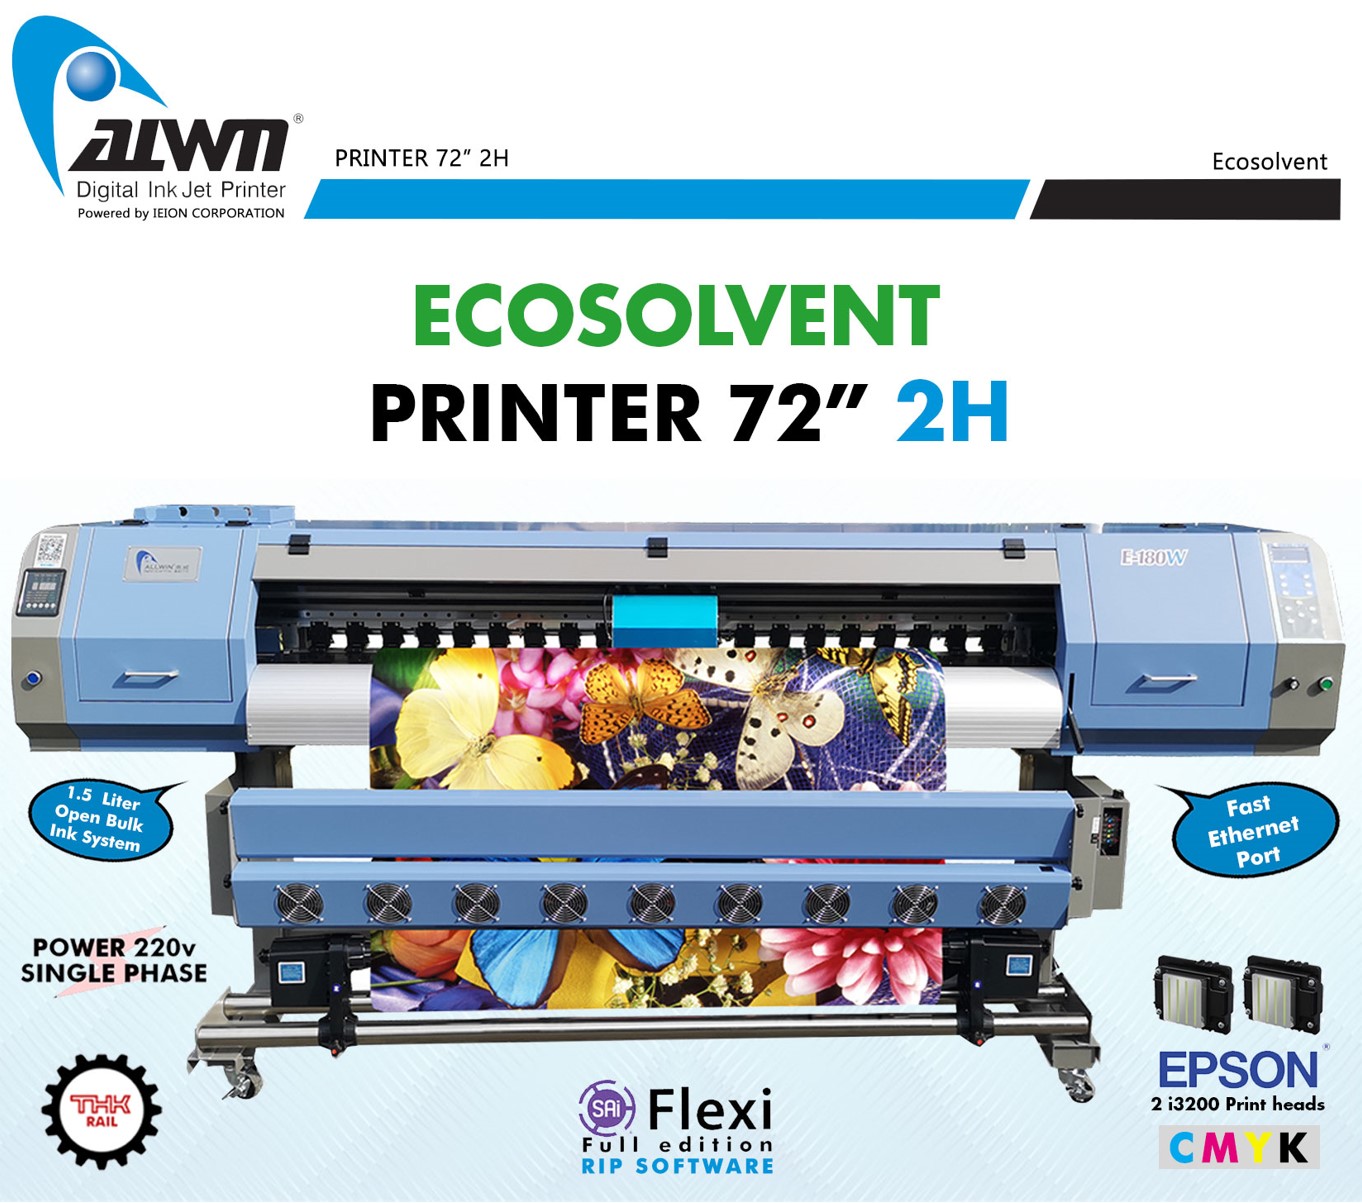 Allwin Ecosolvent or Sublimation Printer 72" 2H